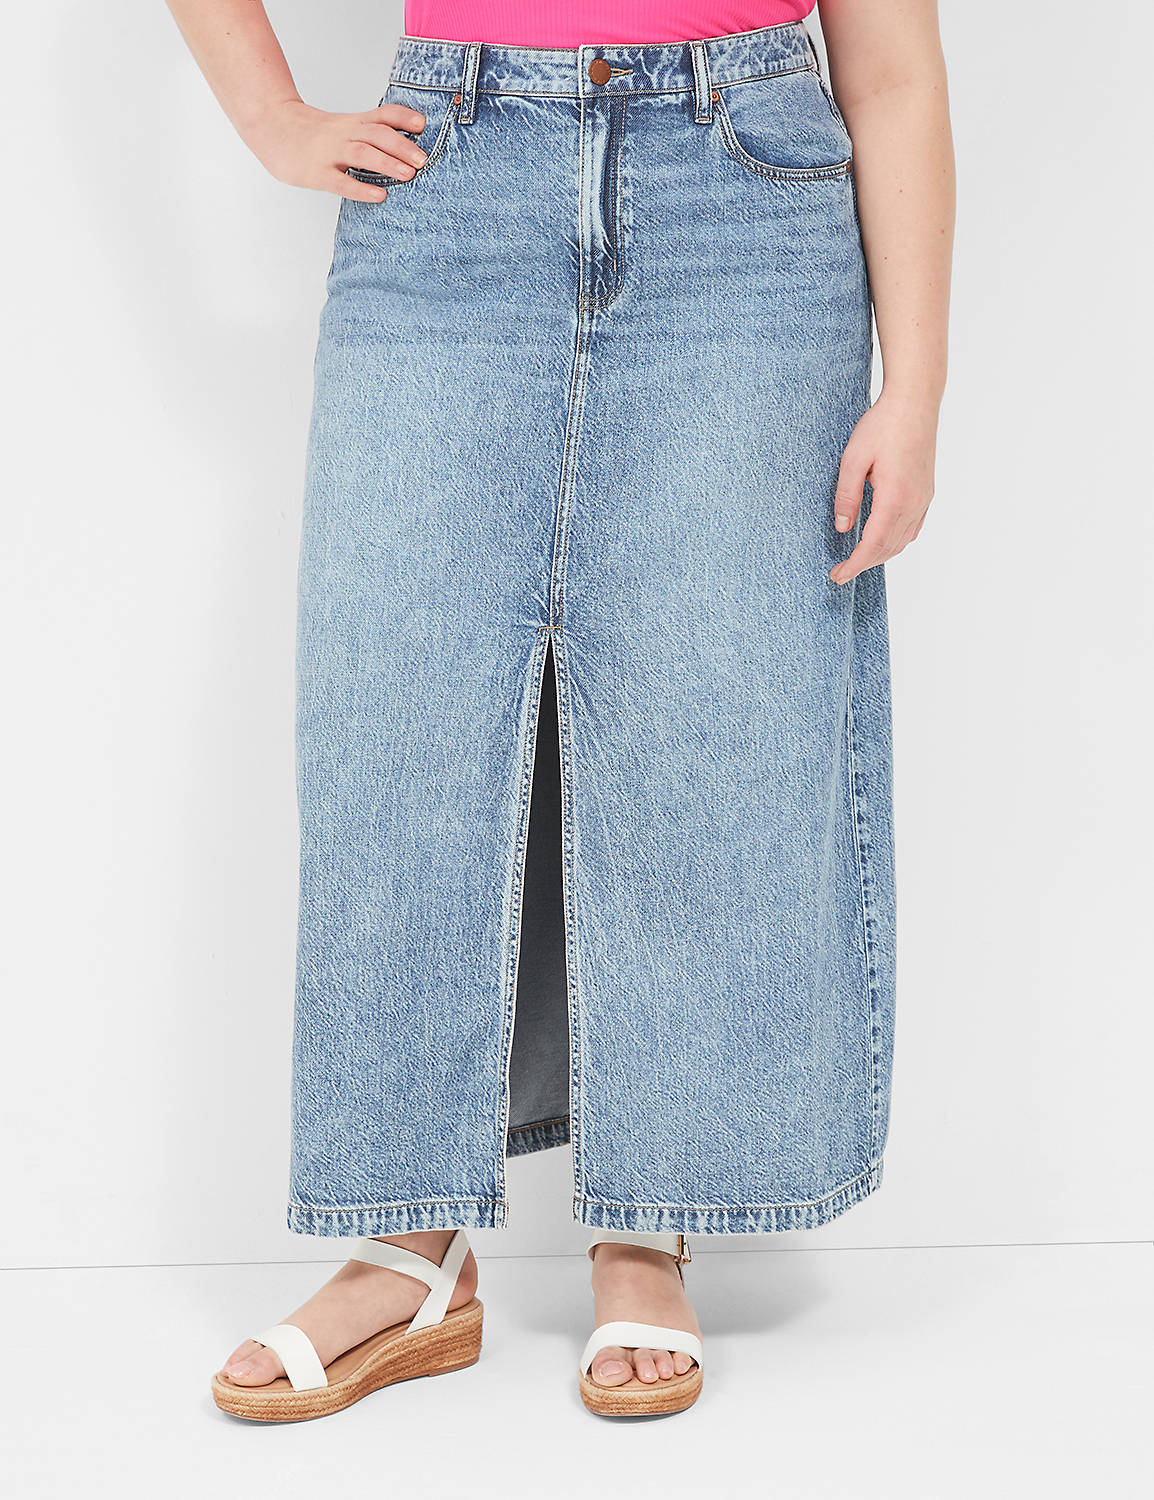 DENIM MAXI SKIRT HIGH RISE- FRONT S Product Image 1